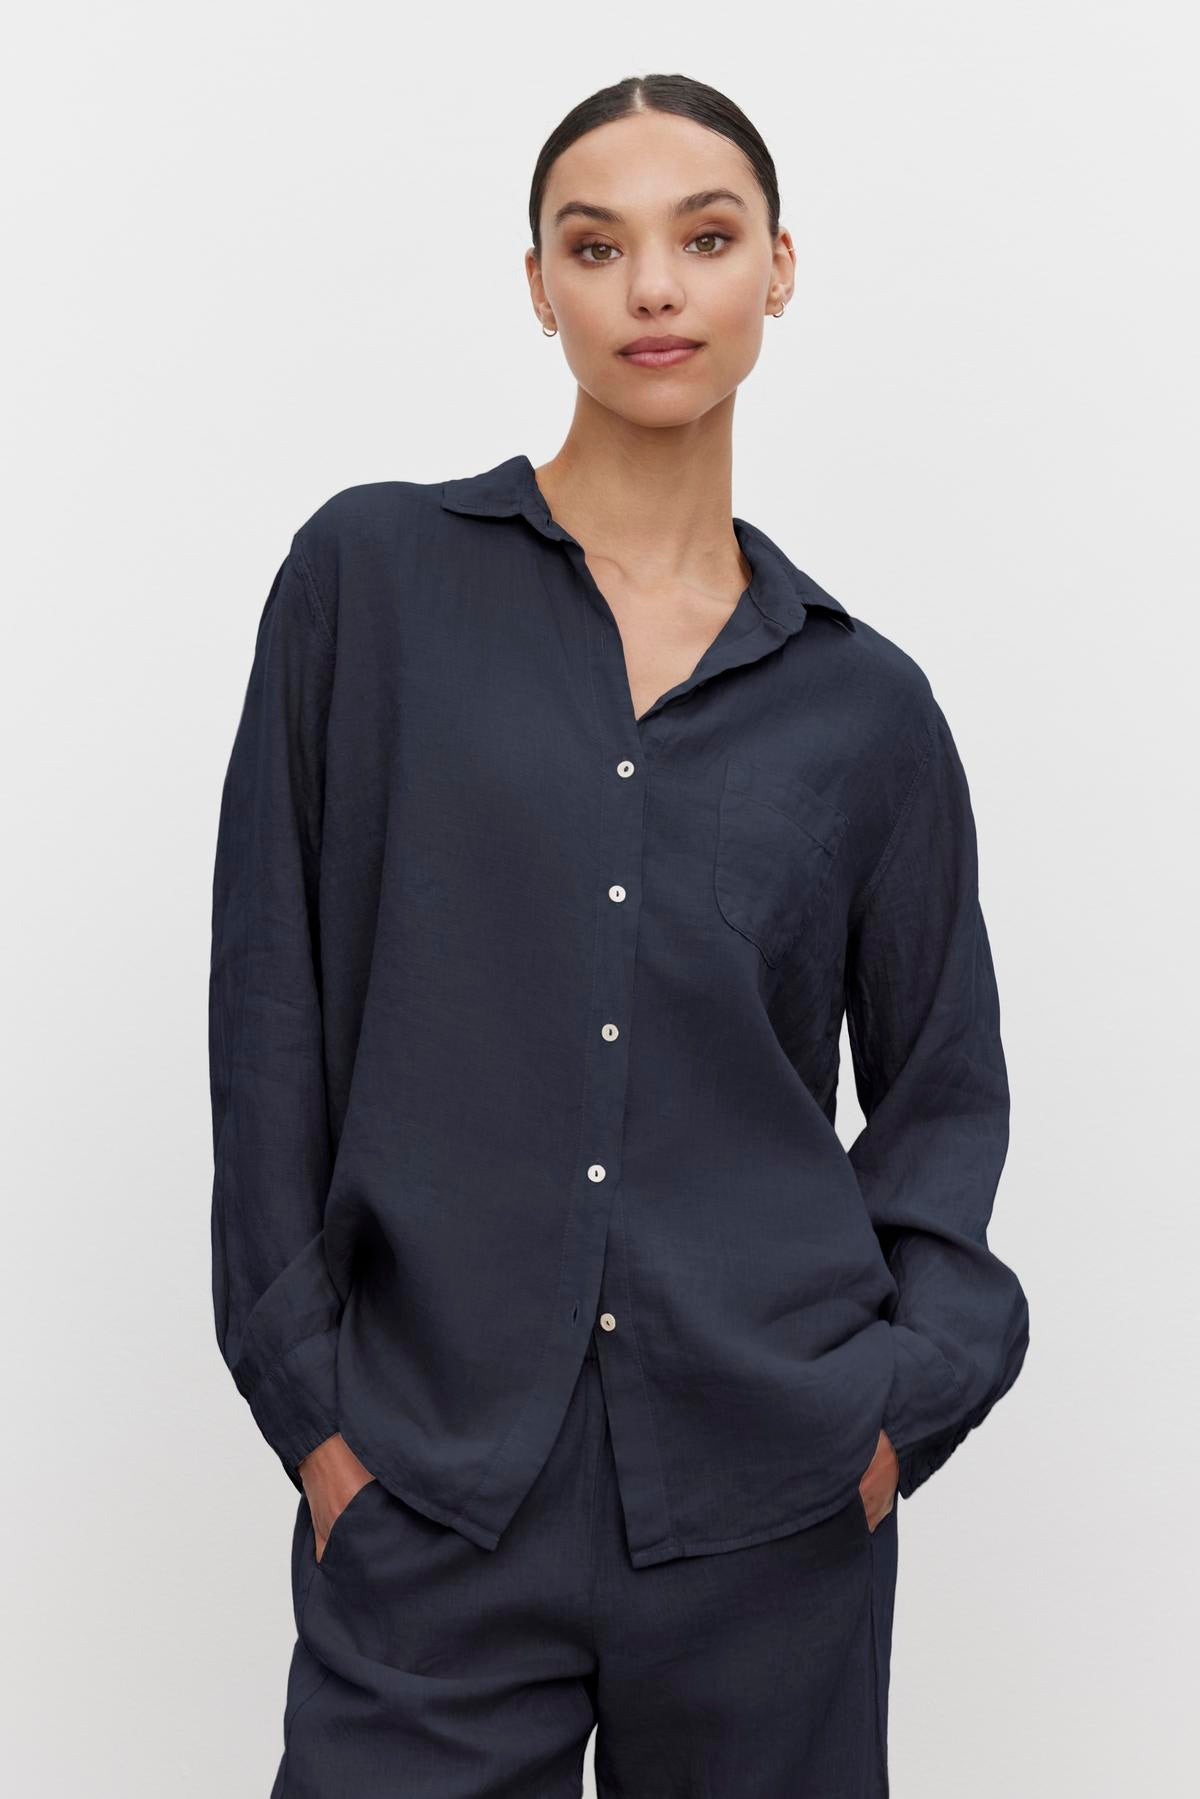 A person with dark hair tied back, wearing a dark blue MULHOLLAND LINEN SHIRT by Velvet by Jenny Graham and matching pants with a relaxed silhouette, stands against a plain white background with hands in pockets.-36592968401089